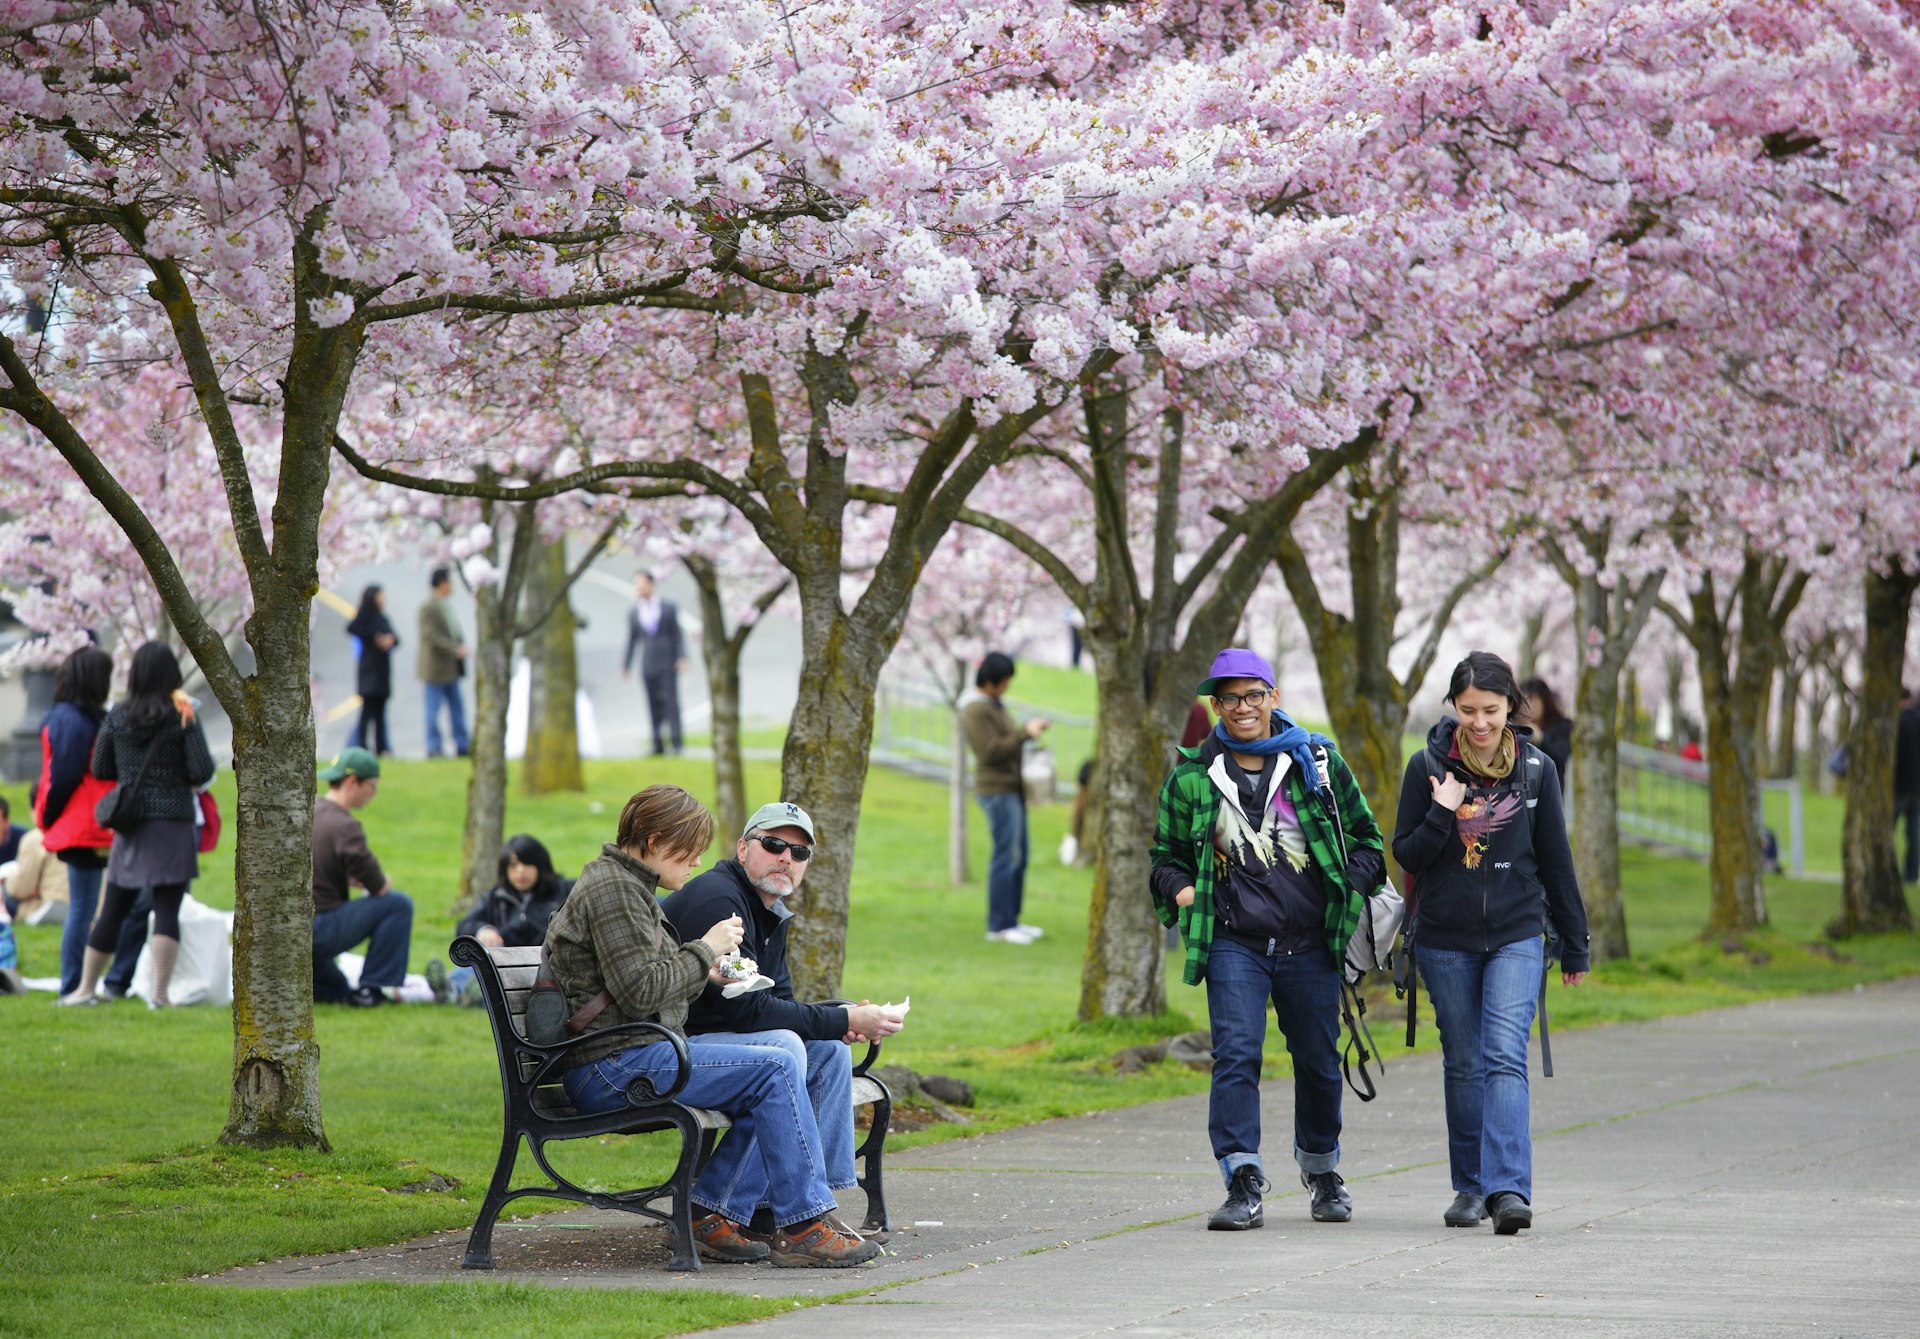 People sitting and walking under cherry blossom trees in full bloom